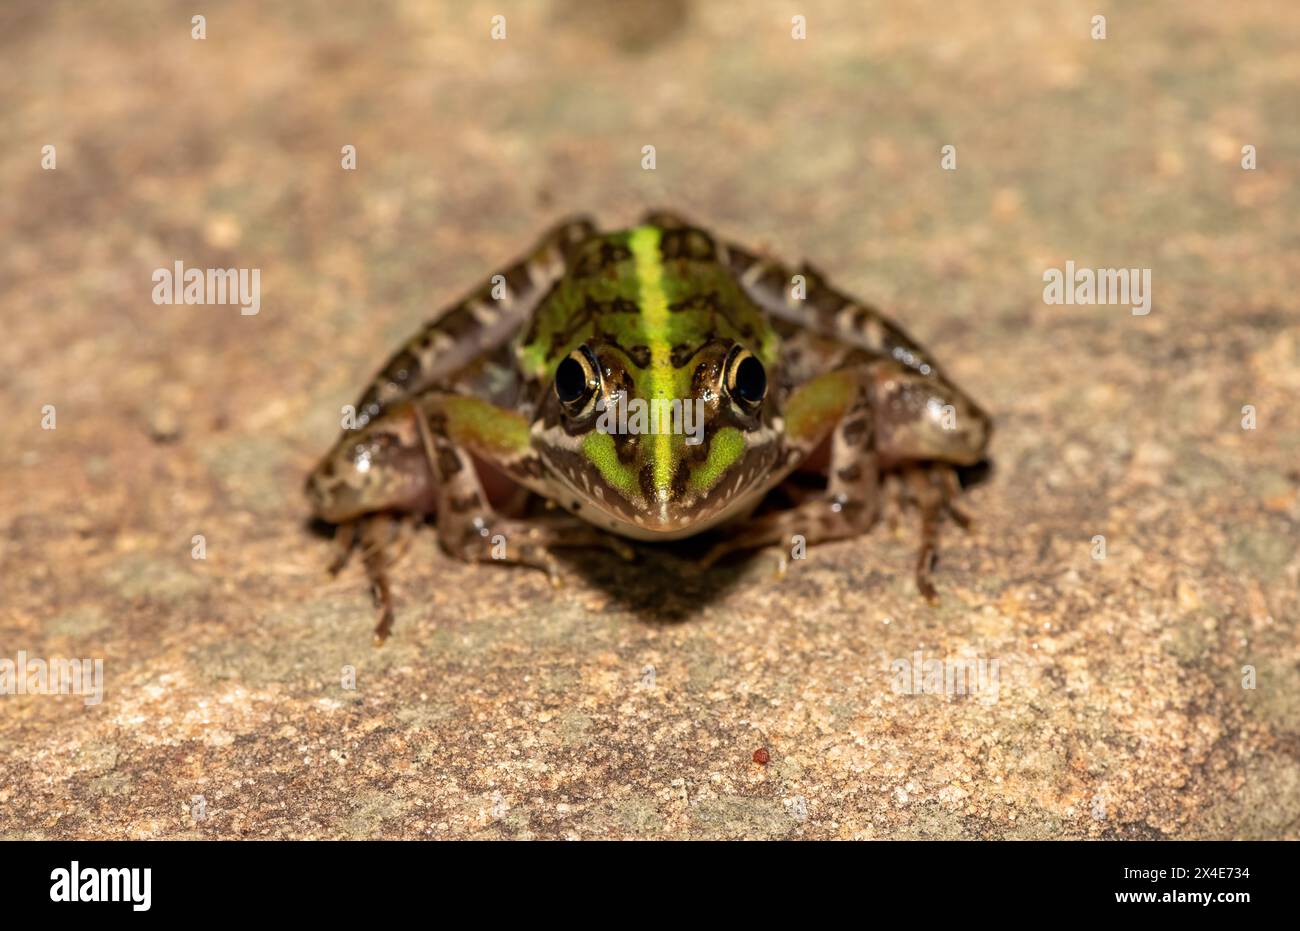 A beautiful common river frog (Amietia angolensis) in the wild Stock Photo